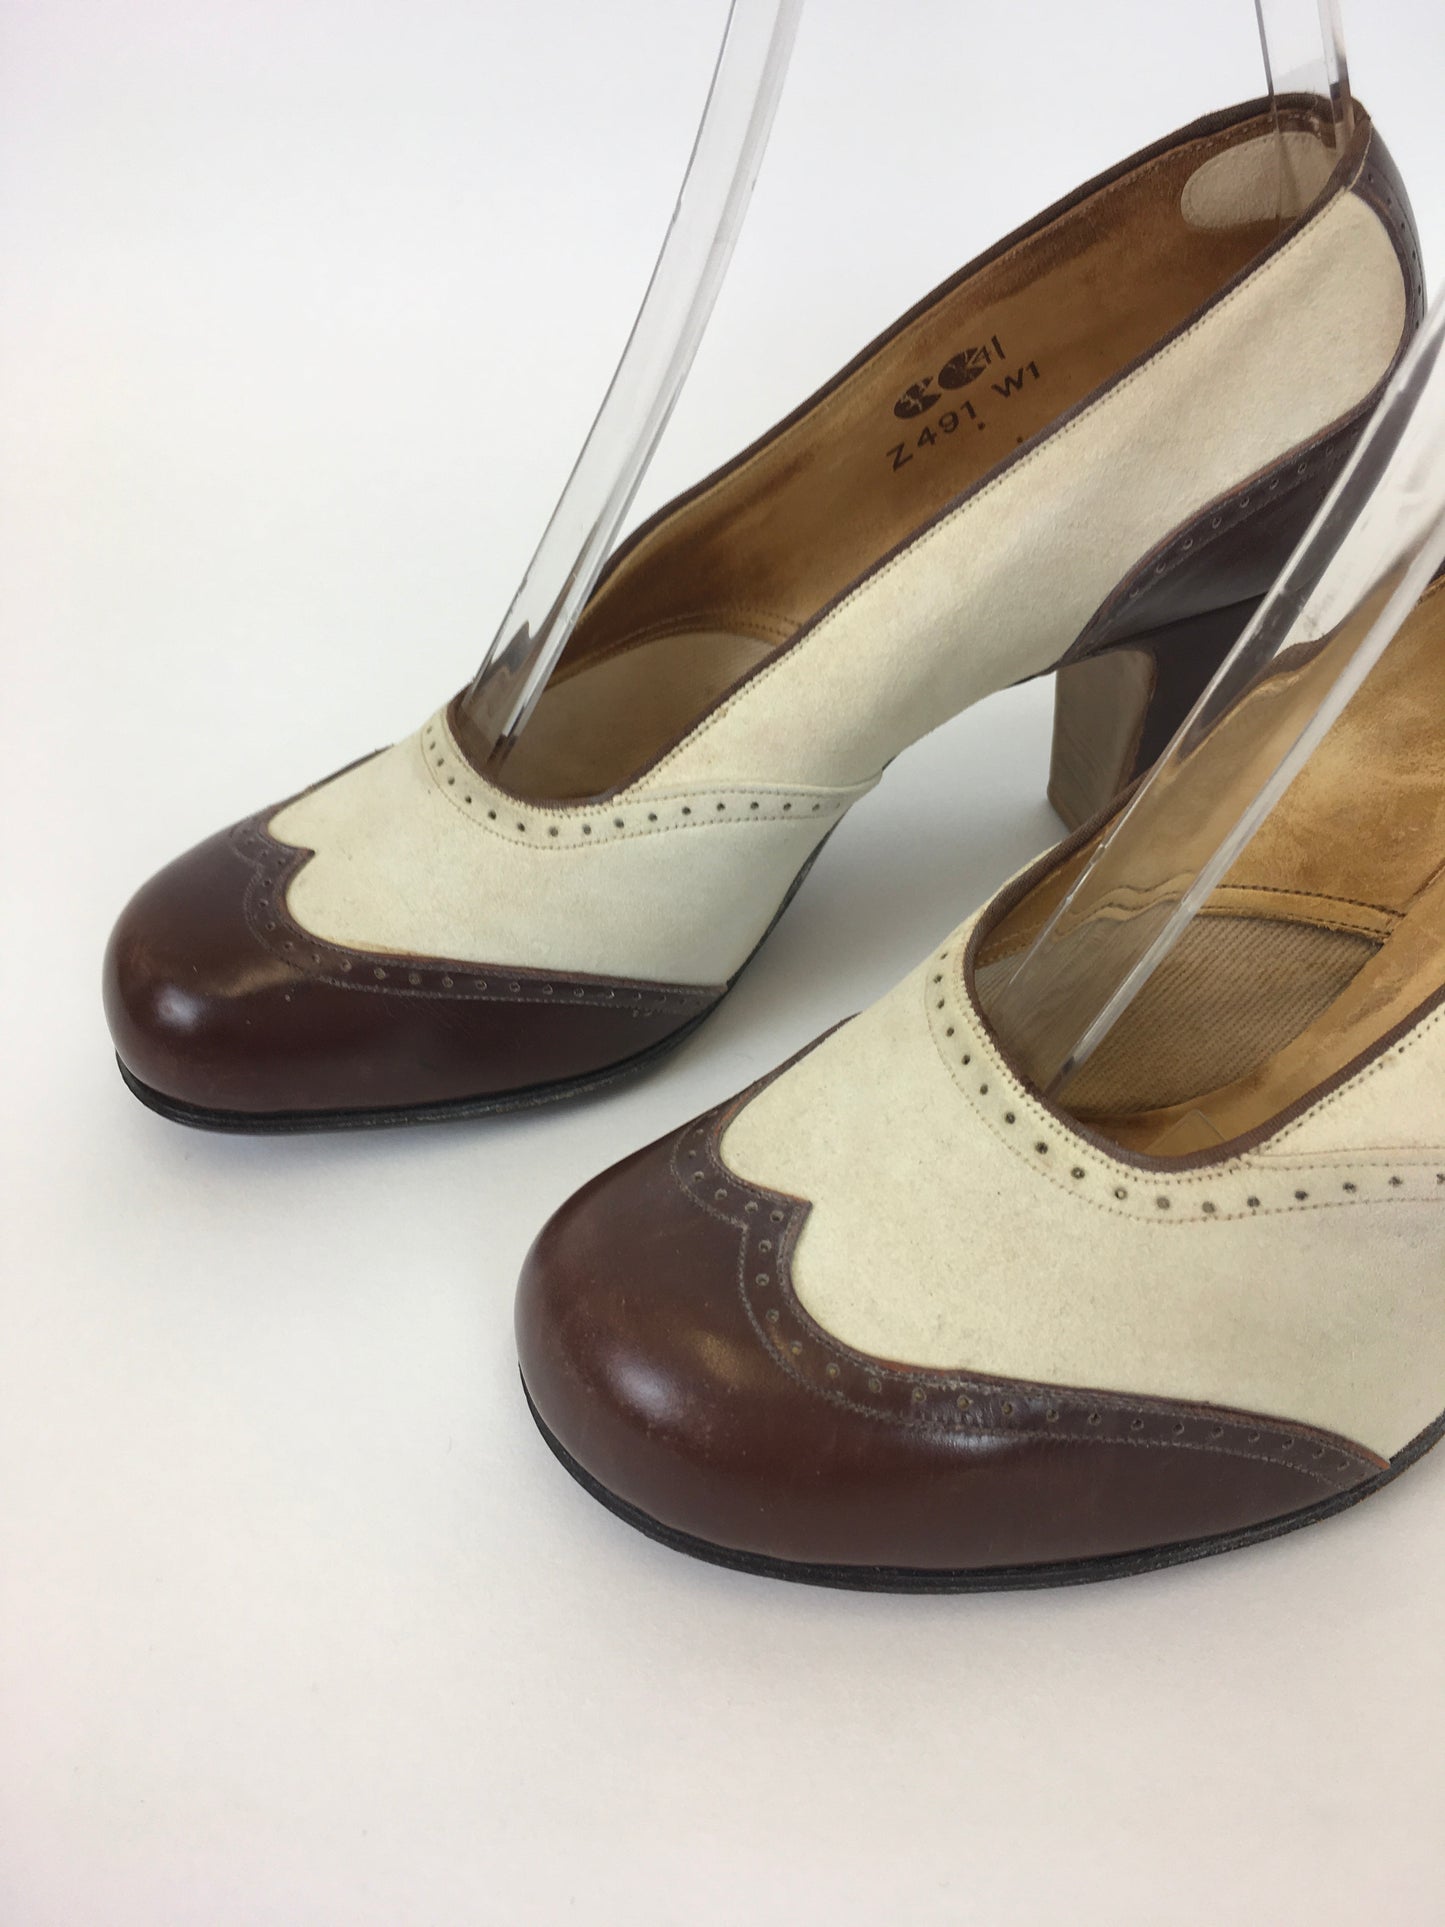 Original 1940s ‘ Start-rite’ CC41 Utility Spectre Shoes - In Iconic Colour-way Cream & Brown